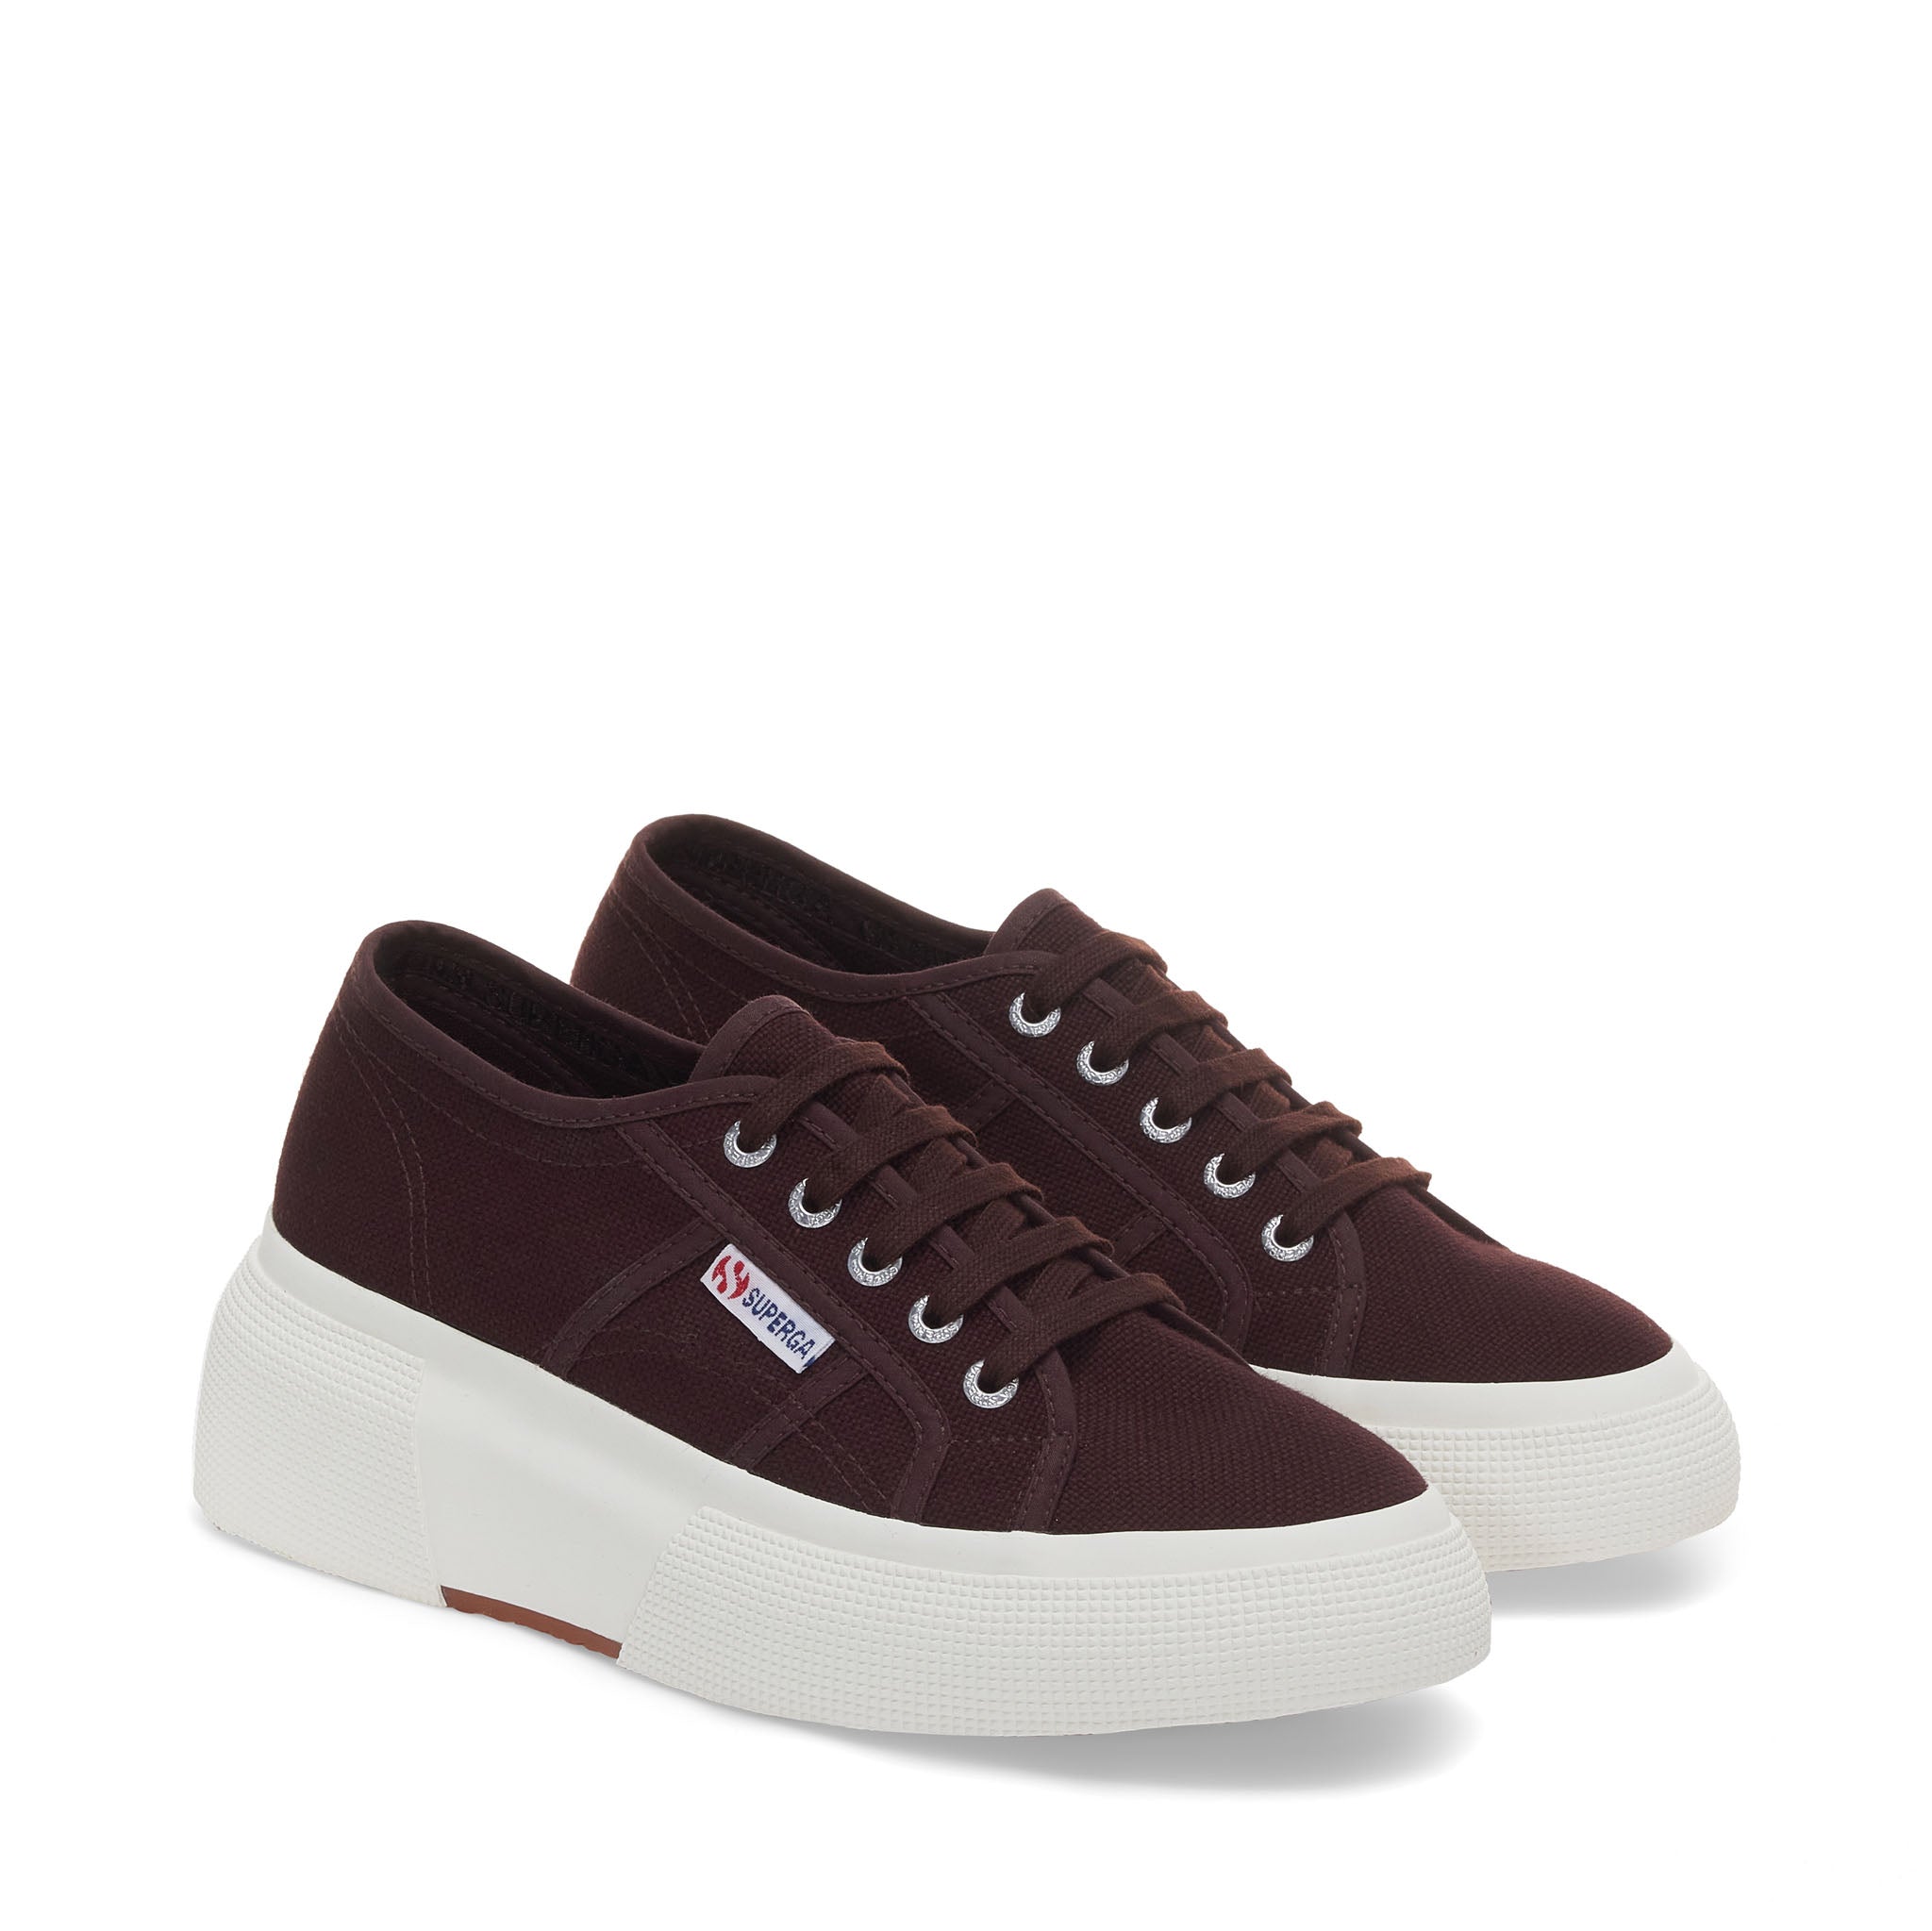 Superga 2287 Bubble Sneakers - Brown. Front view.